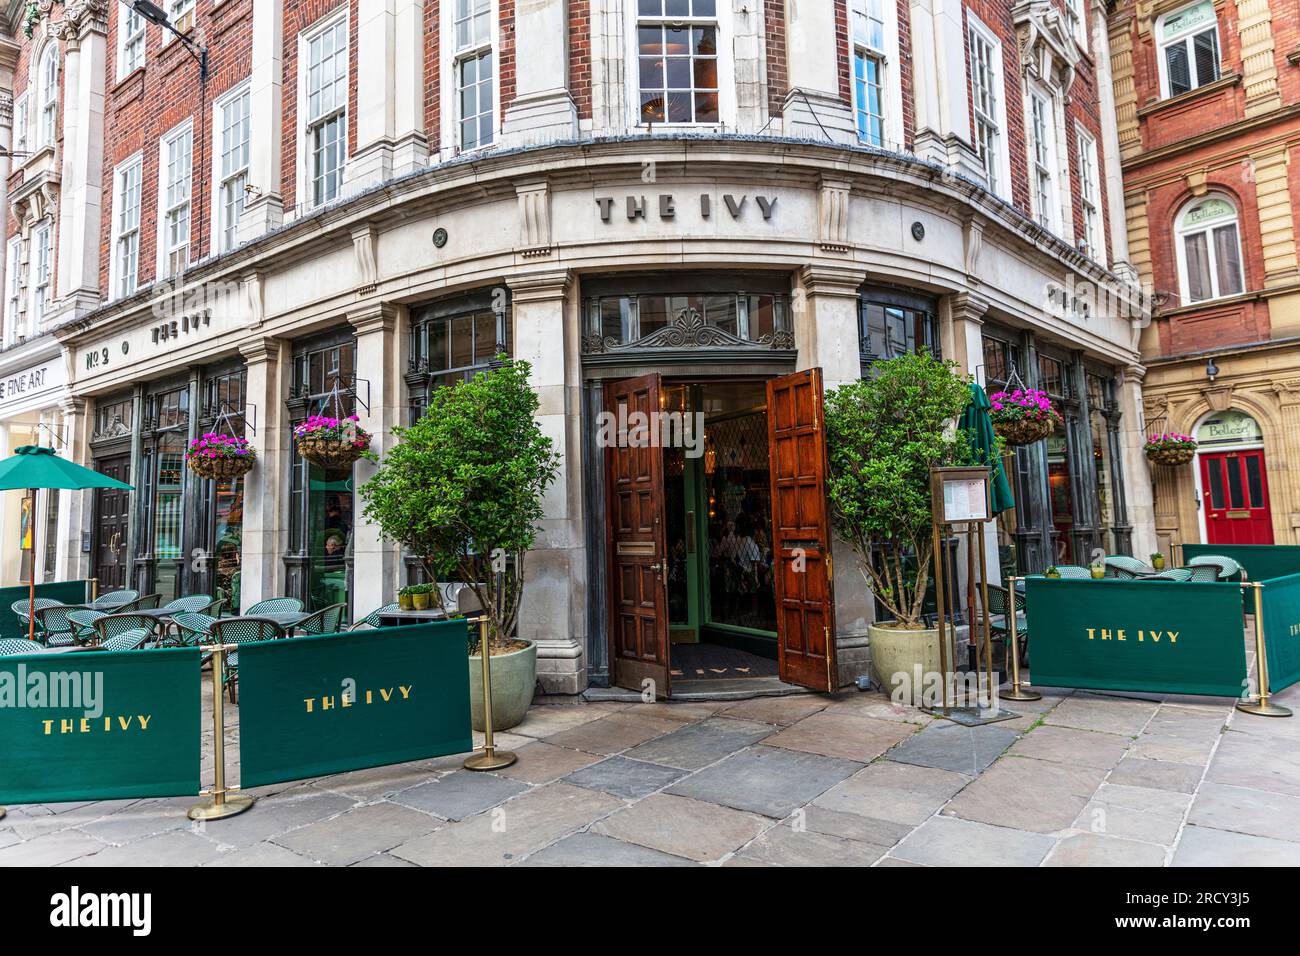 The Ivy York, The Ivy, The Ivy St Helen’s Square in York UK, The Ivy Brasserie, Brasserie, Restaurant, The Ivy Restaurant, York eating places, eating Stock Photo